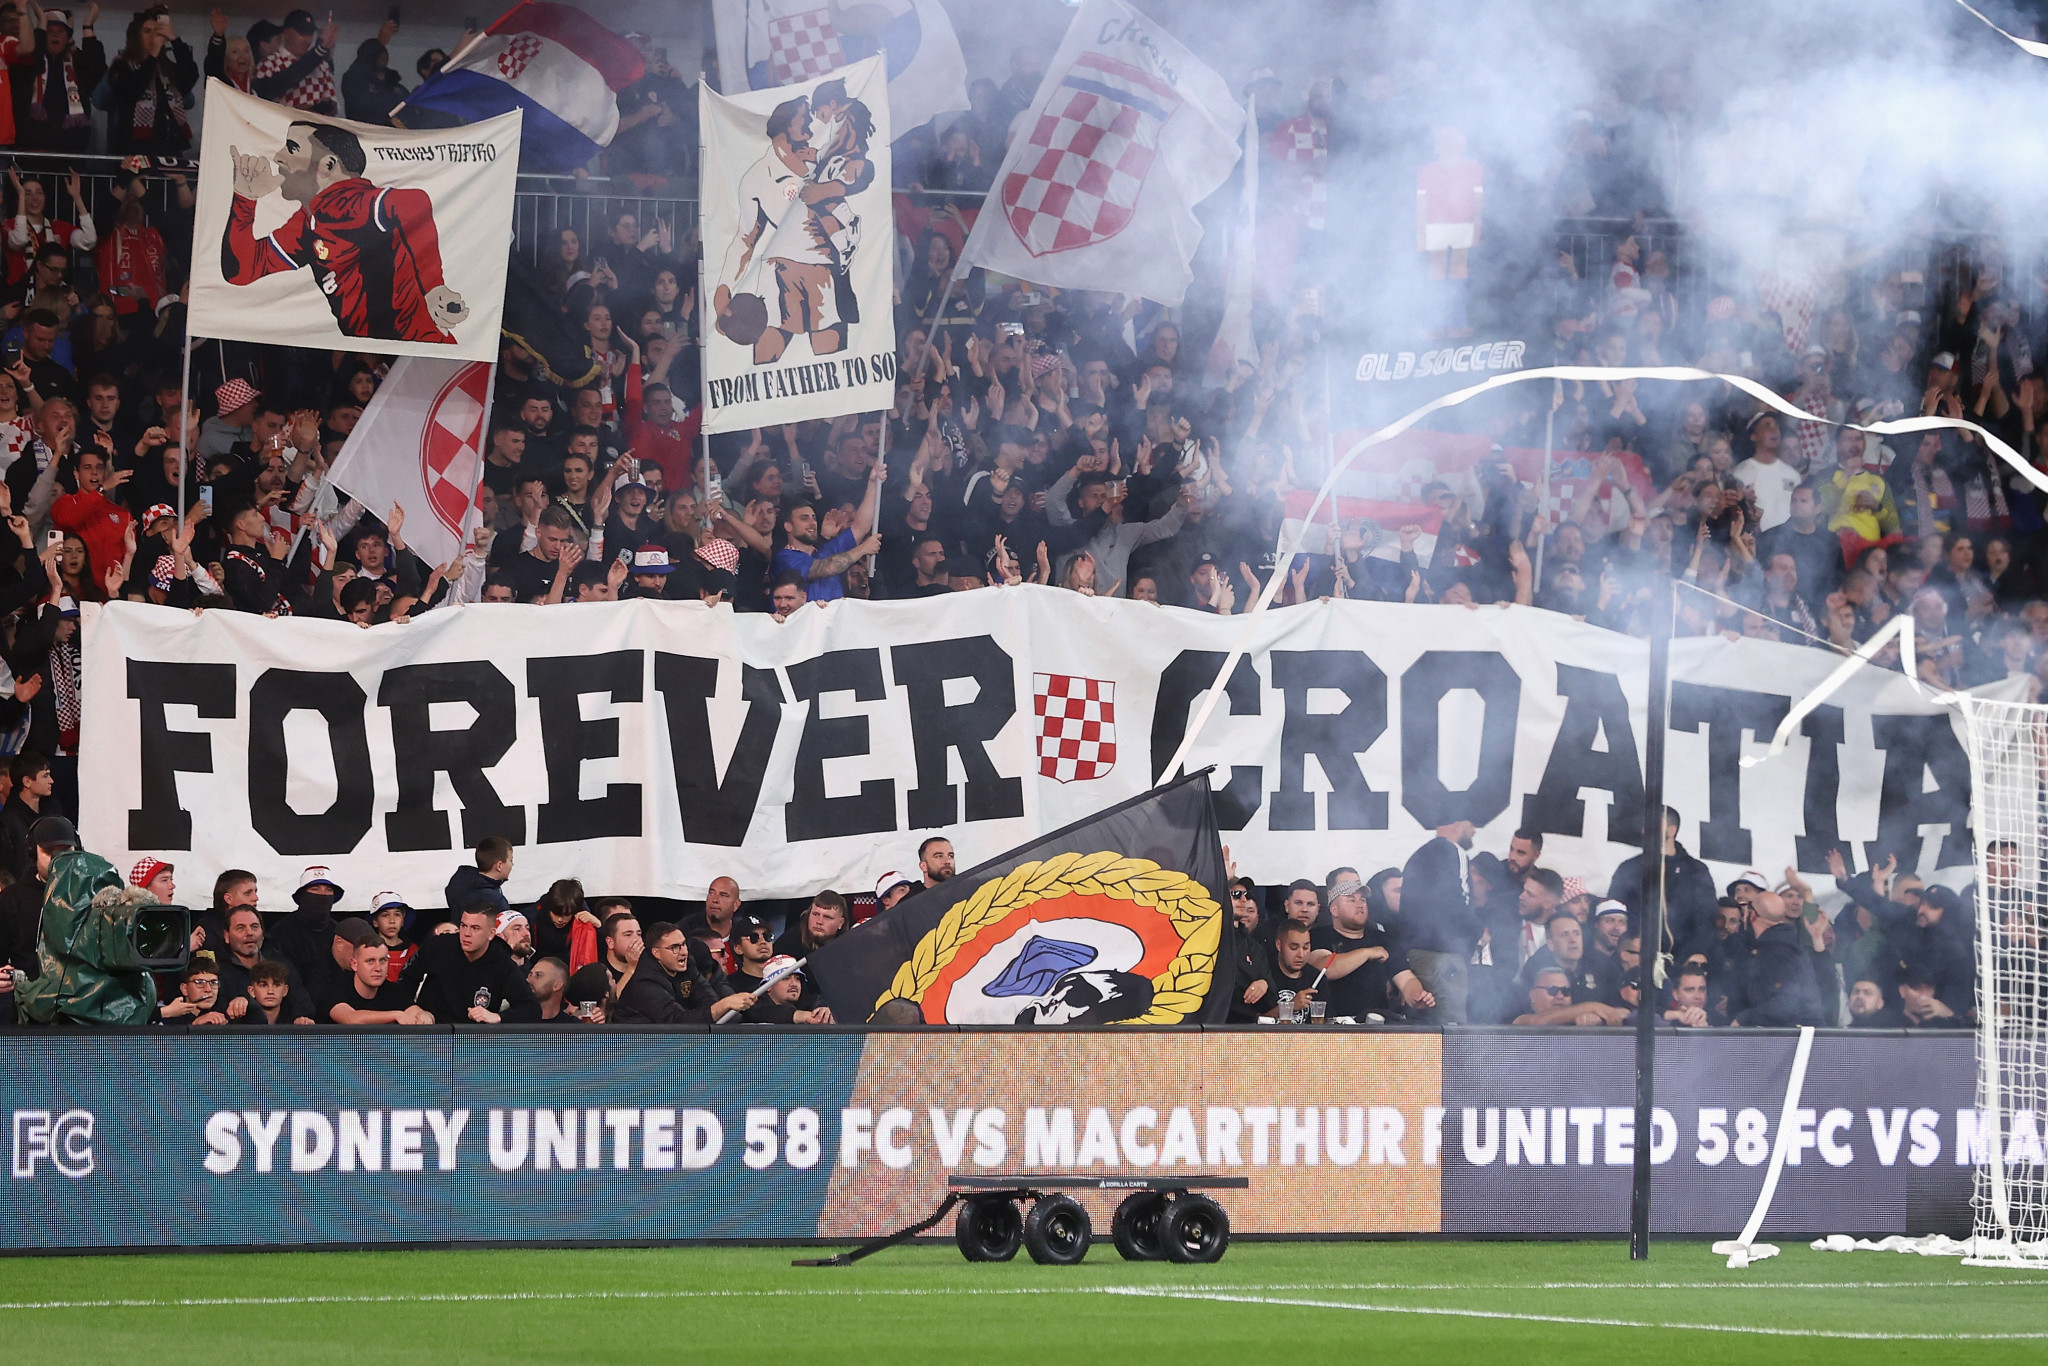 Football Australia is following up on further racist behaviour at the Australia Cup final after banning two Sydney United 58 fans for life for giving Nazi salutes ©Getty Images